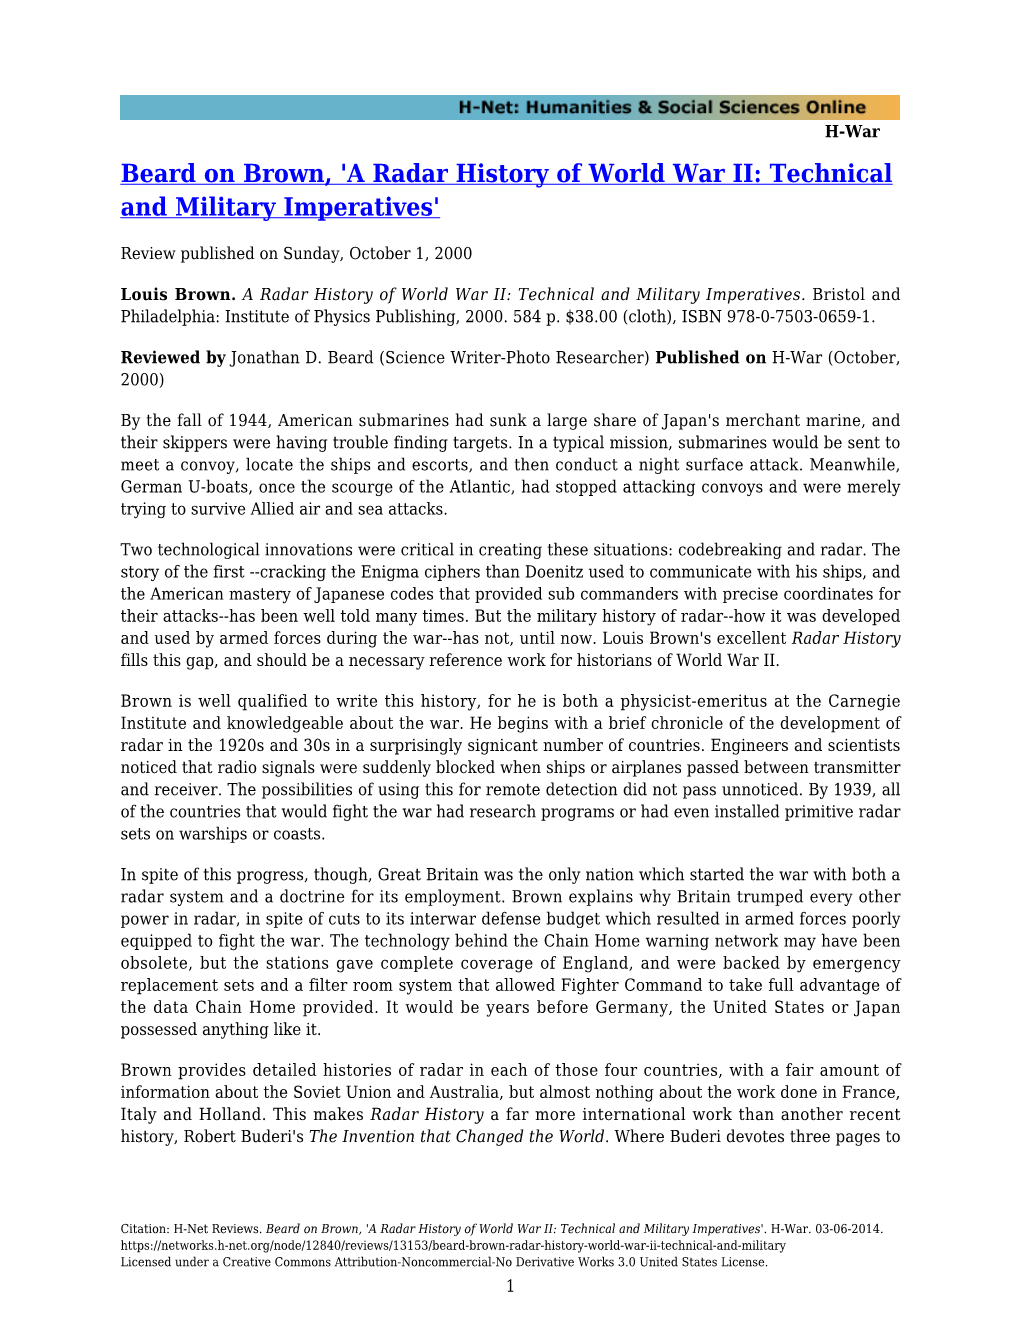 A Radar History of World War II: Technical and Military Imperatives'